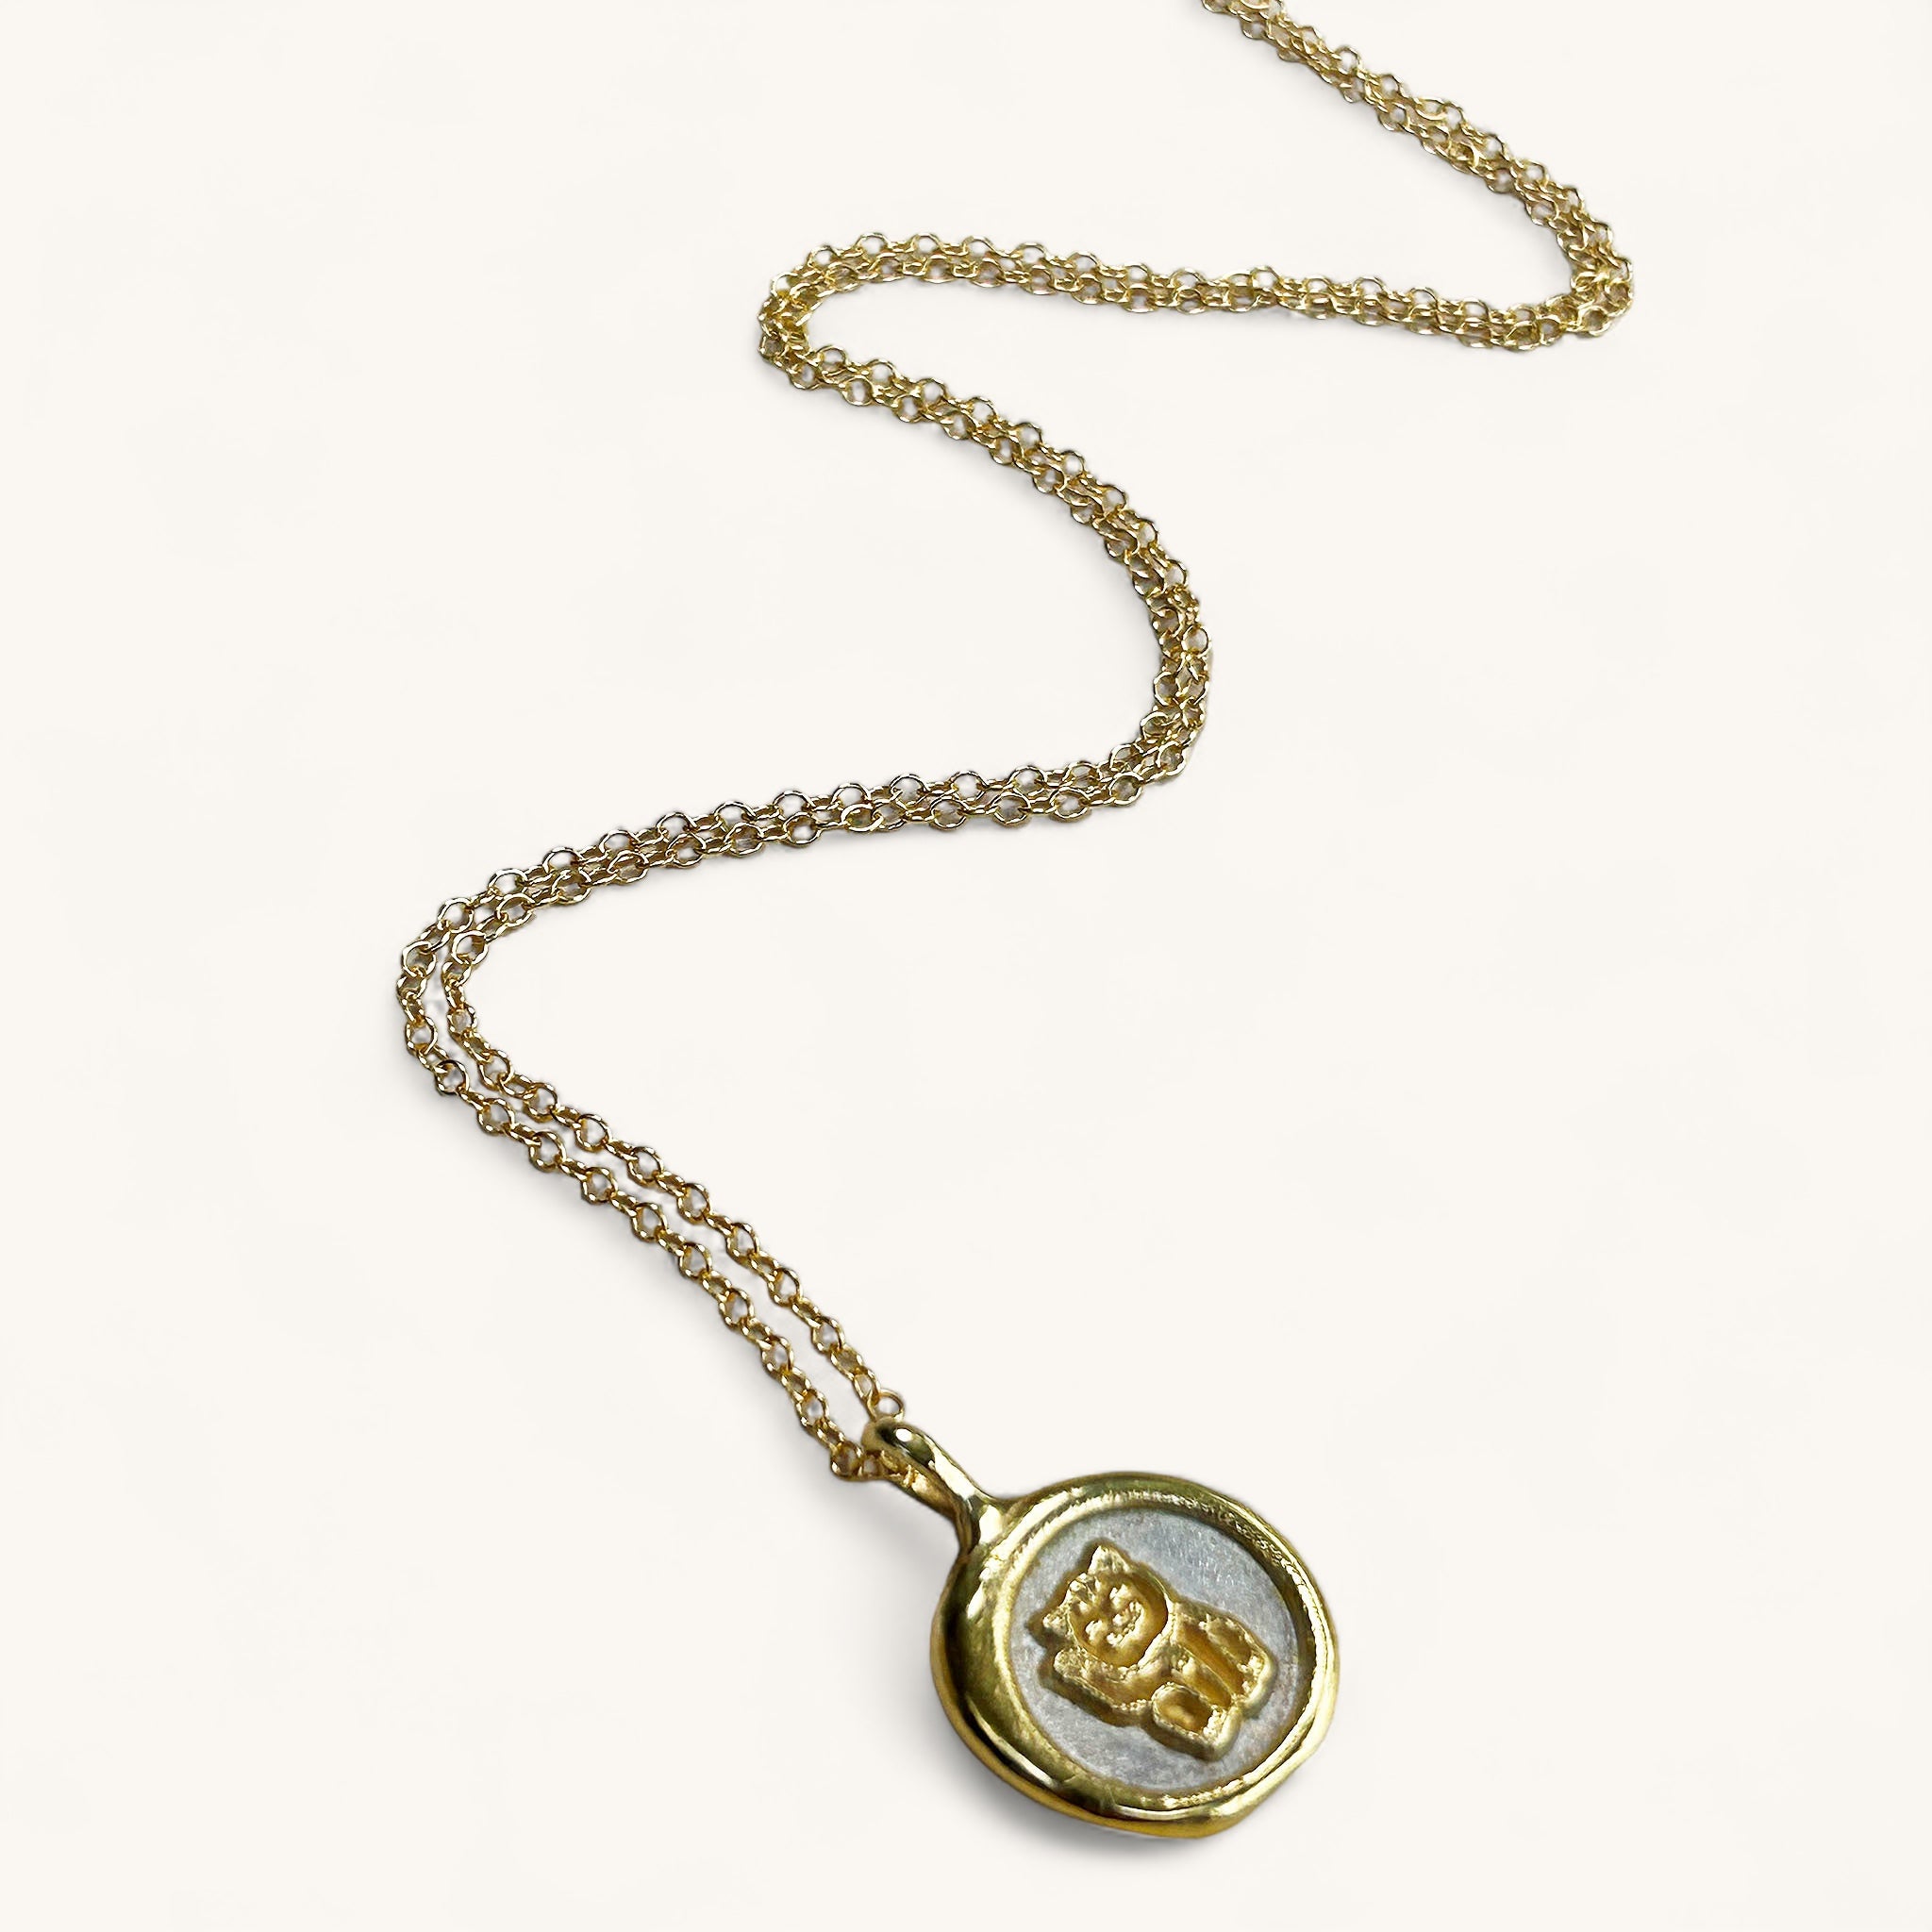 Jennifer Loiselle Lucky Cat Necklace in silver and gold vermeil